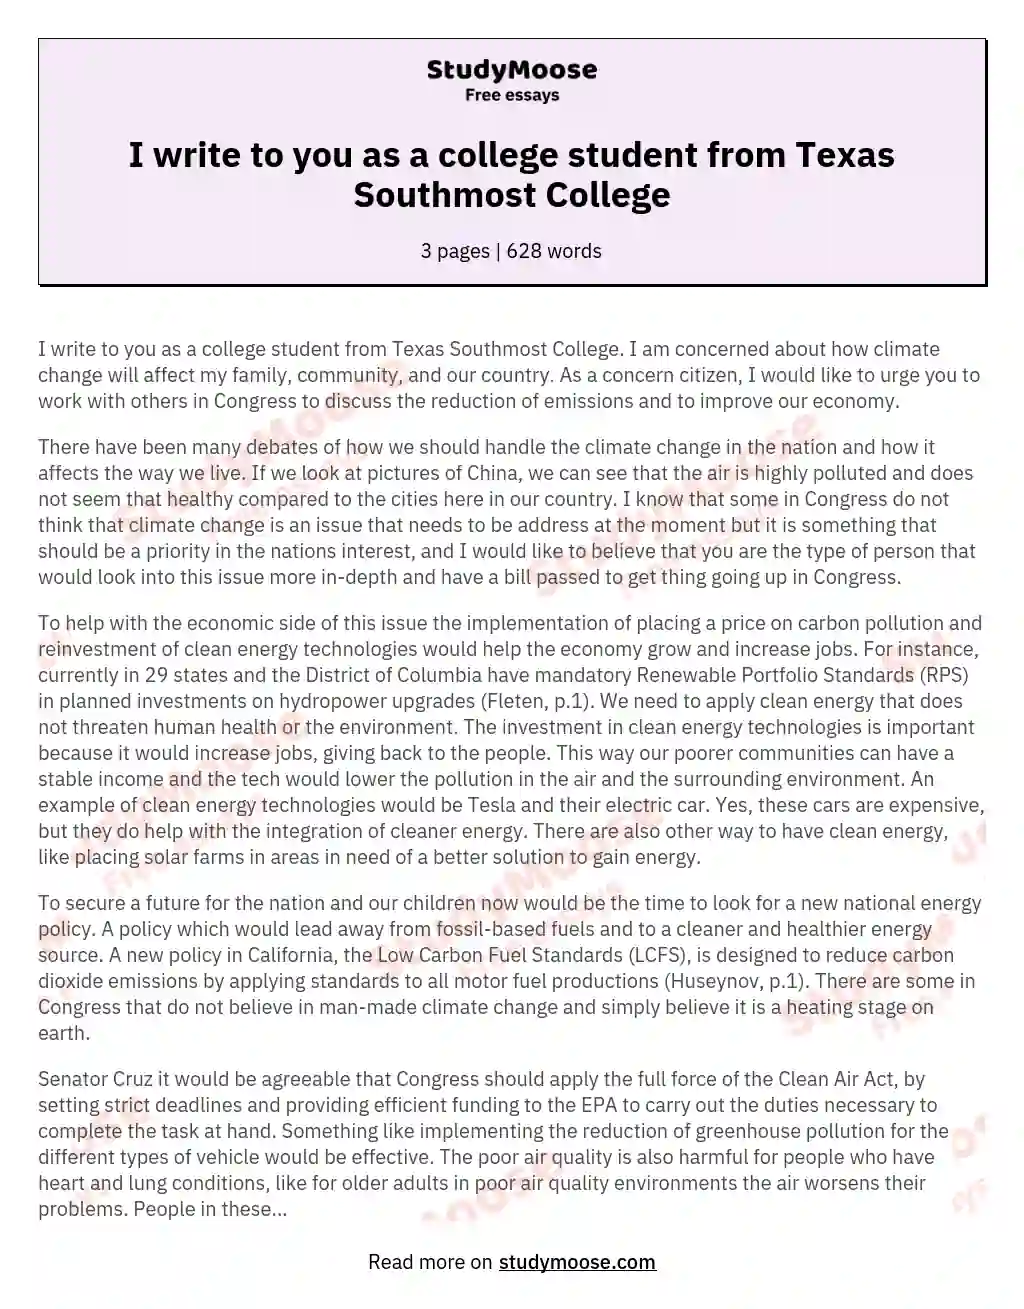 I write to you as a college student from Texas Southmost College